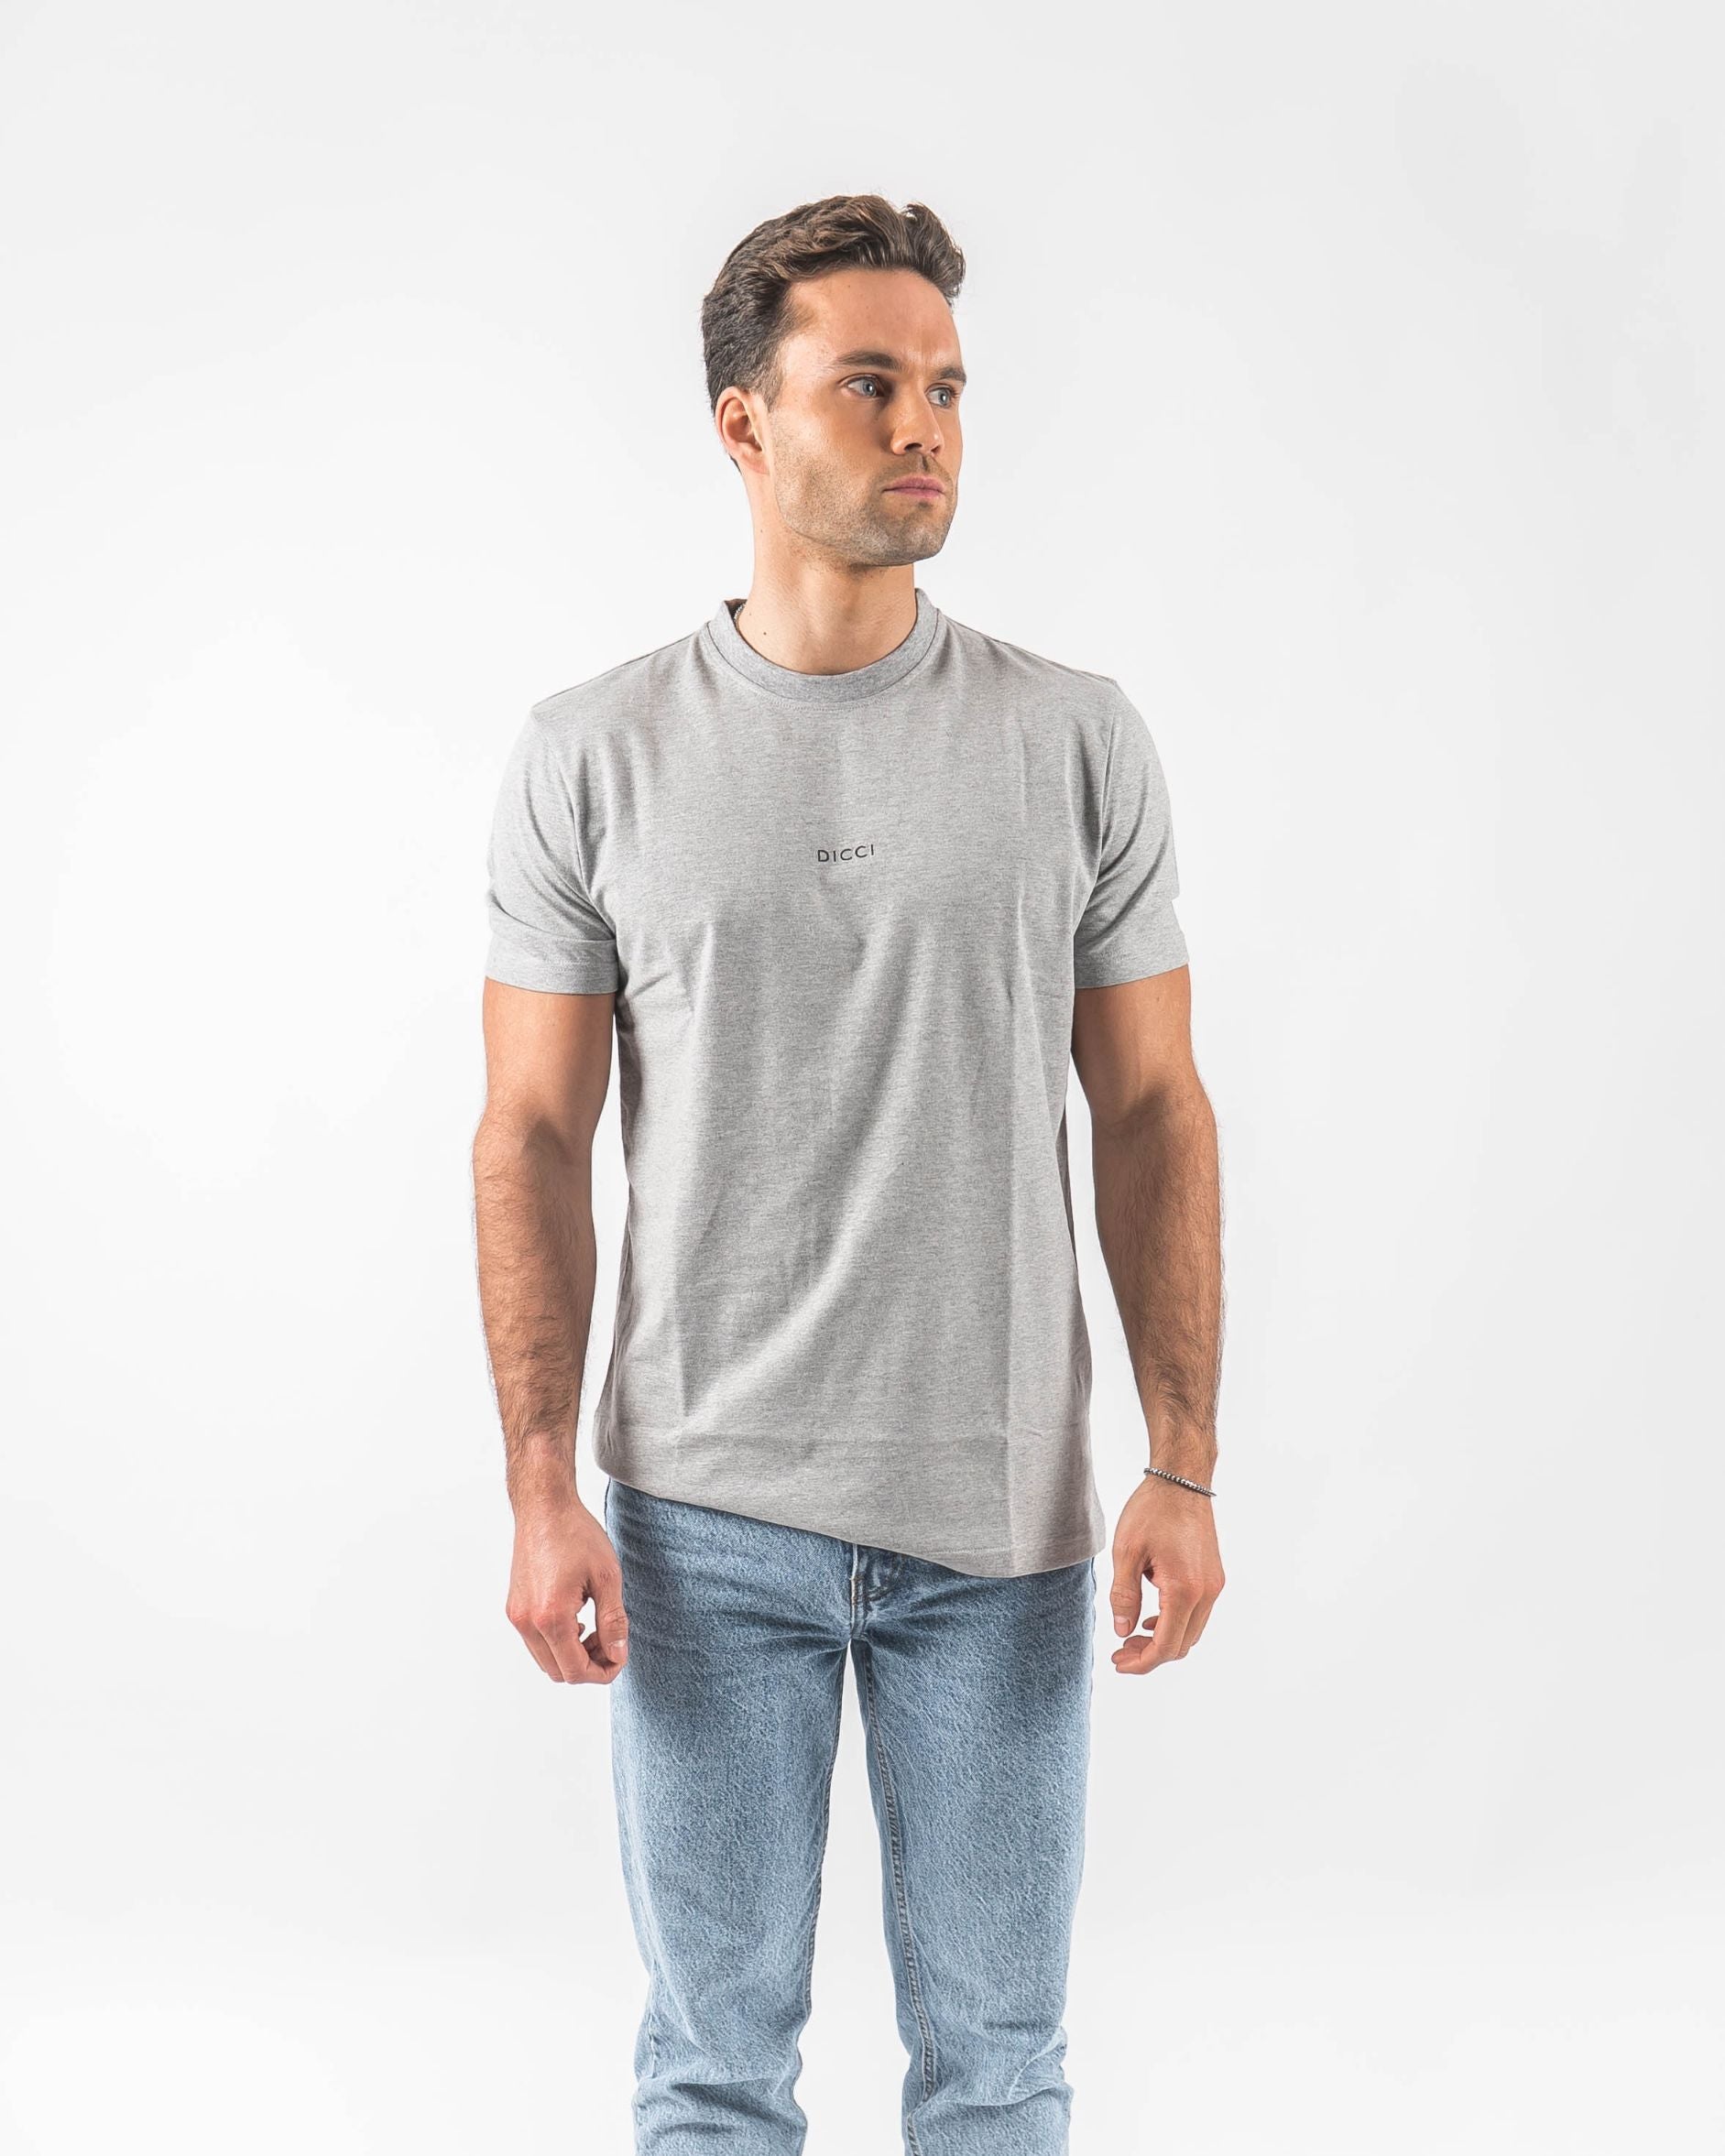 Basic Grey Slim Fit T-shirt on the models body - Cotton T-shirts - Unissex Clothing Online - Dicci